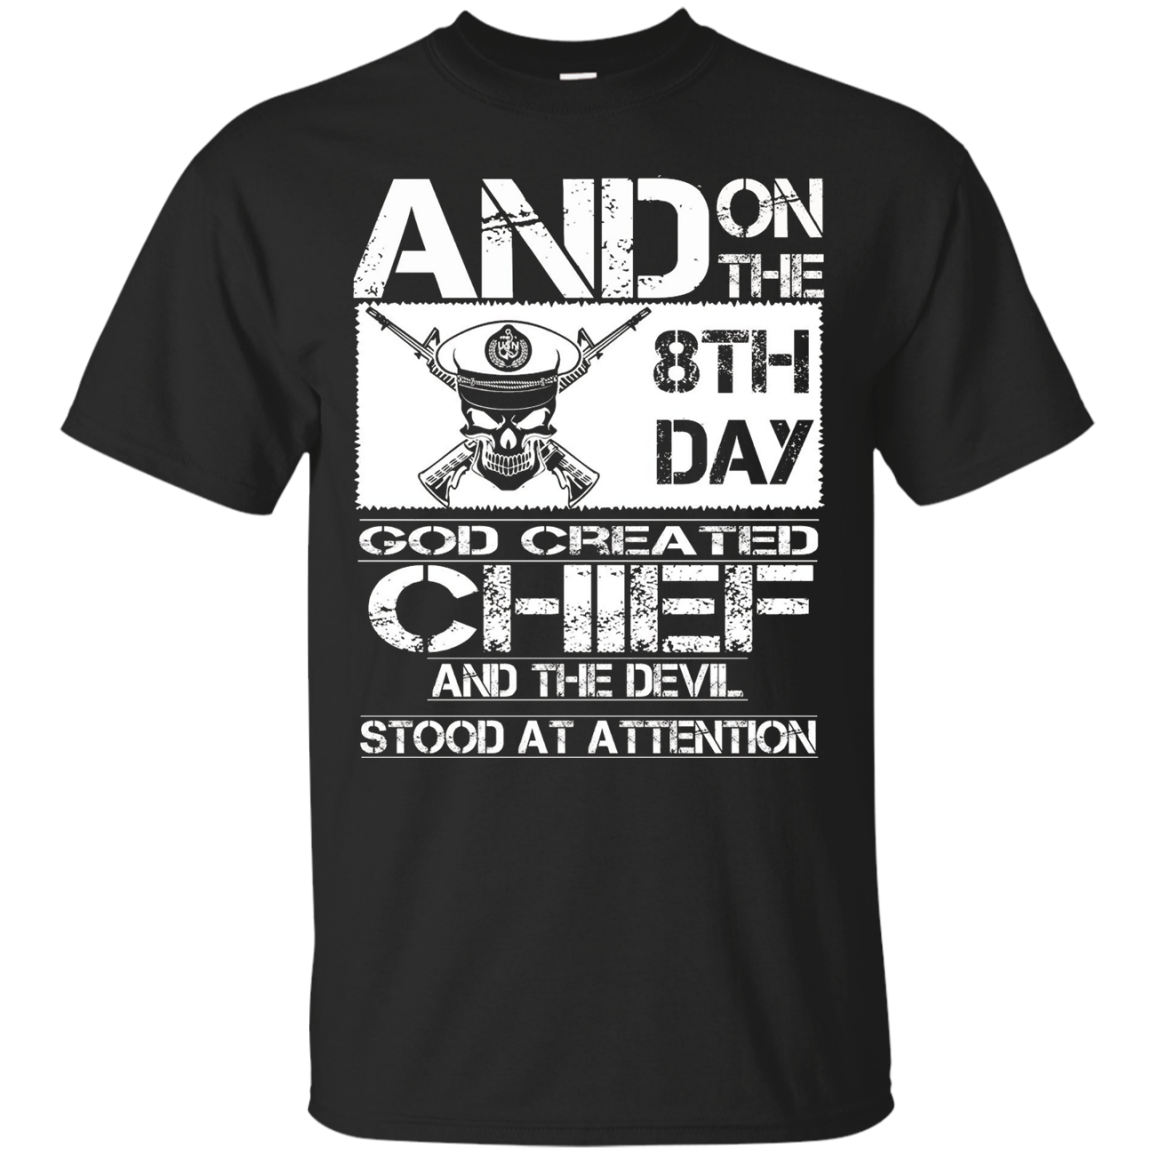 Chief T-shirt , and on the 8th day god created chief and the